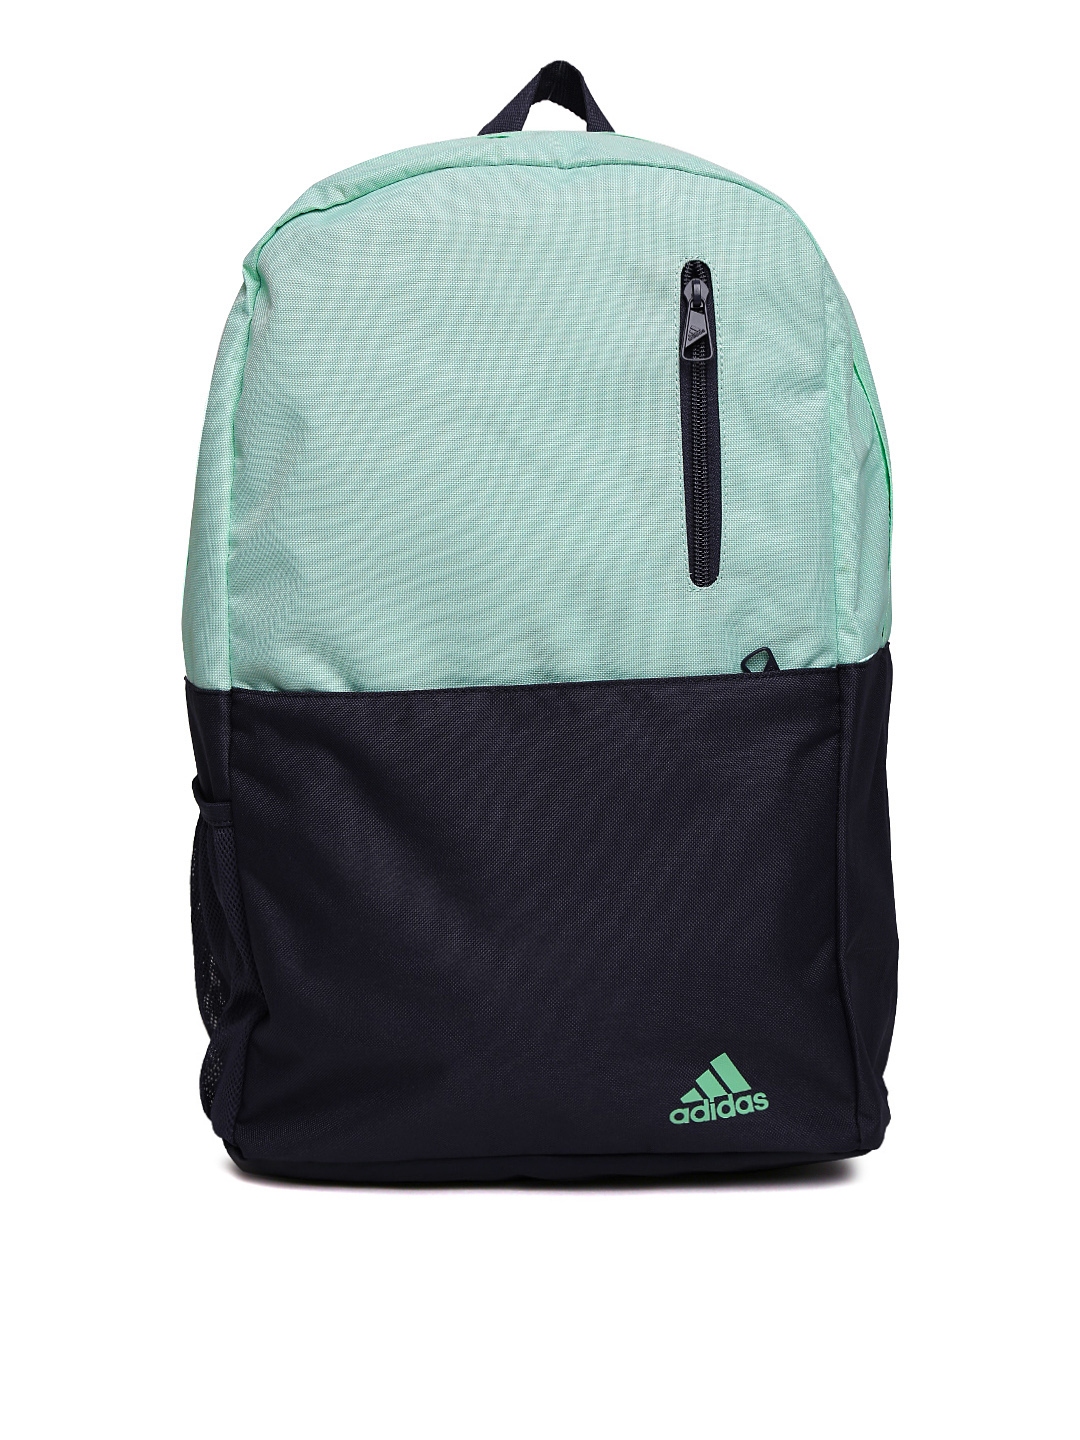 adidas backpack mint green